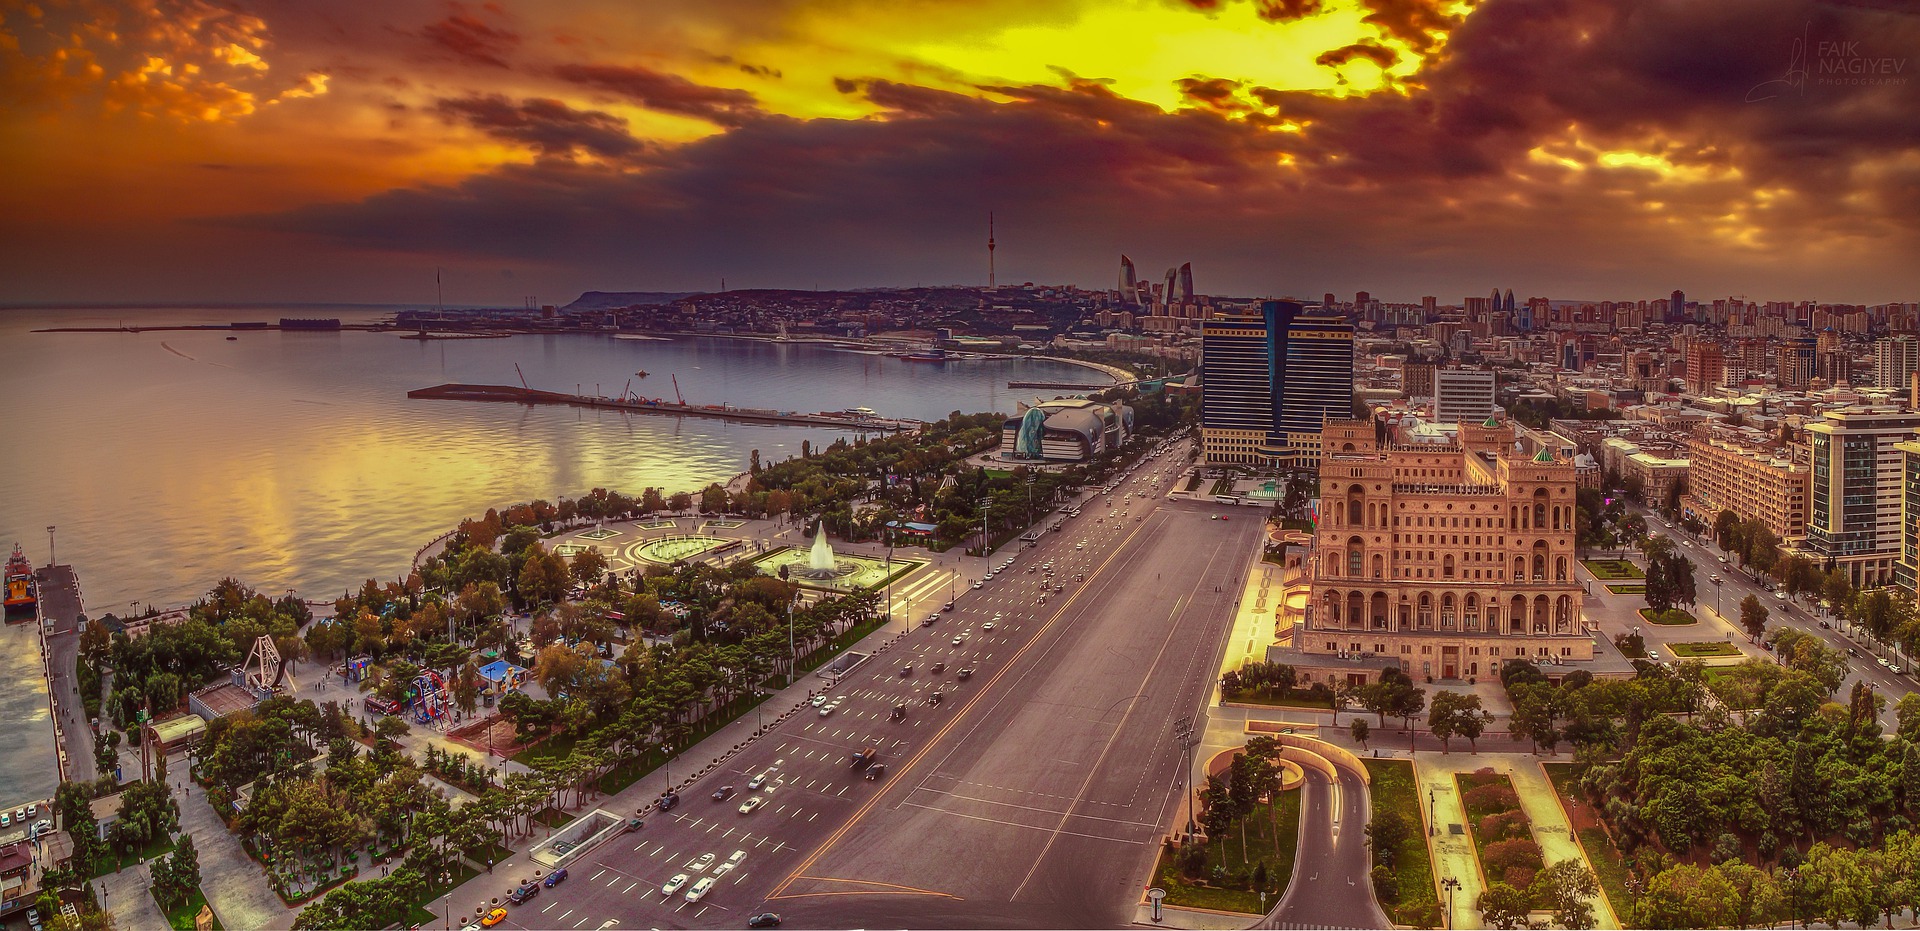 Top 5 Best Places To Visit In Baku